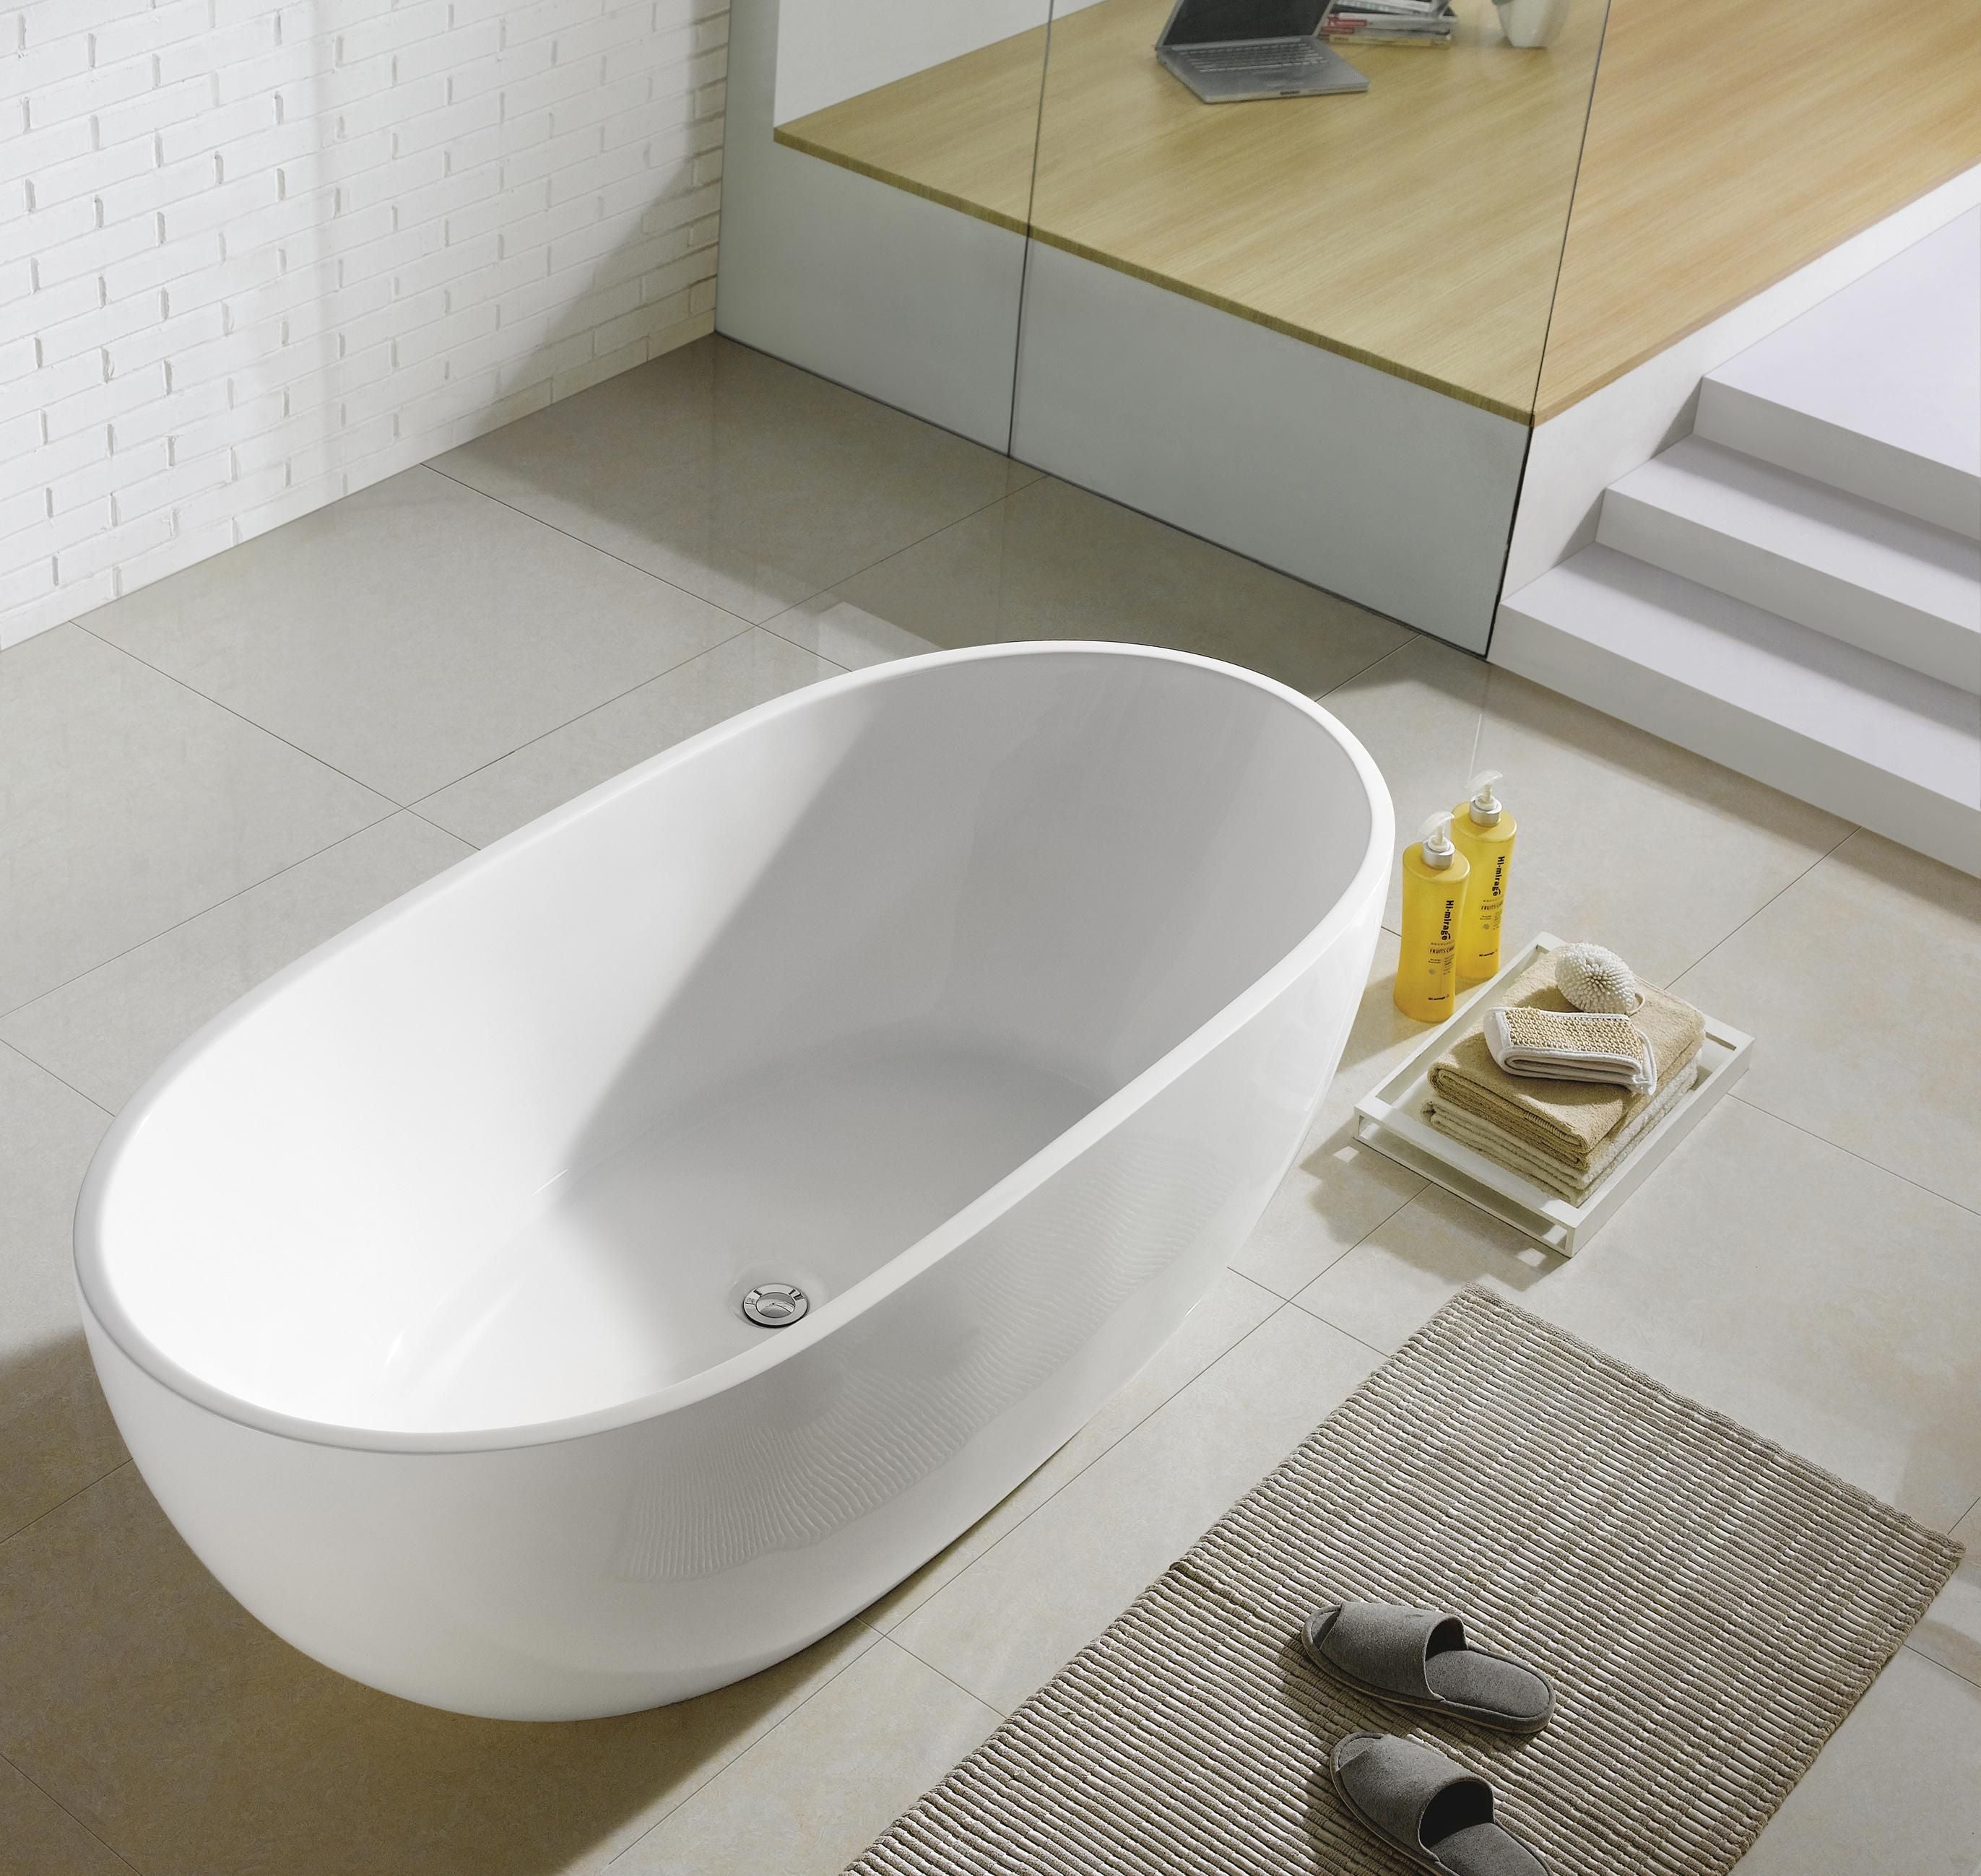 POSEIDON OLIVIA FREE STANDING BATH GLOSS WHITE (AVAILABLE IN 1000MM, 1300MM ,1530MM AND 1690MM)